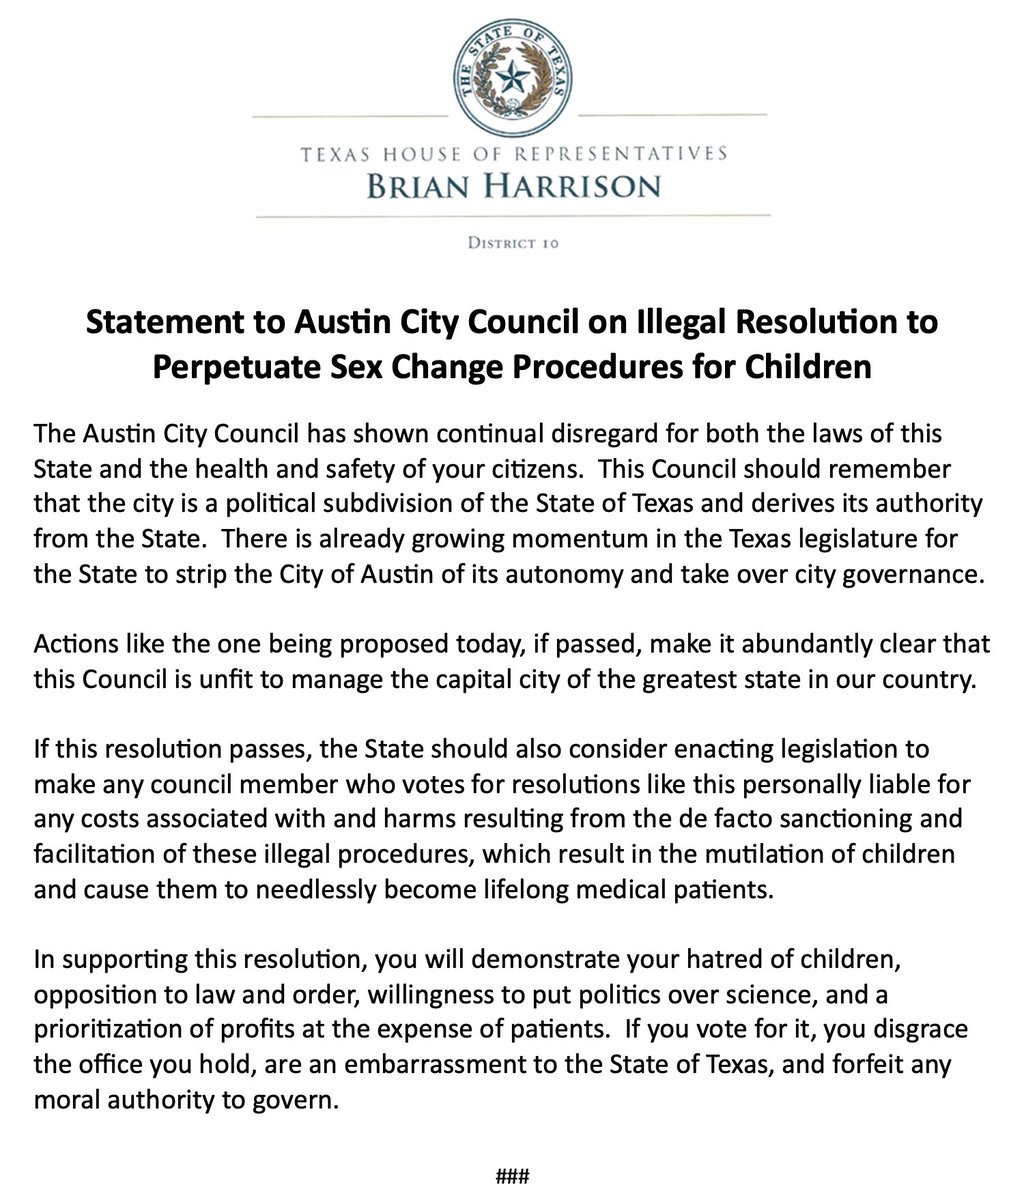 🚨 Breaking: My statement to Austin City Council on their illegal attempt to perpetuate child mutilation in defiance of state law. Thank you to Michelle Evans, who plans to deliver and read this to council members at today's meeting. FULL STATEMENT: The Austin City Council